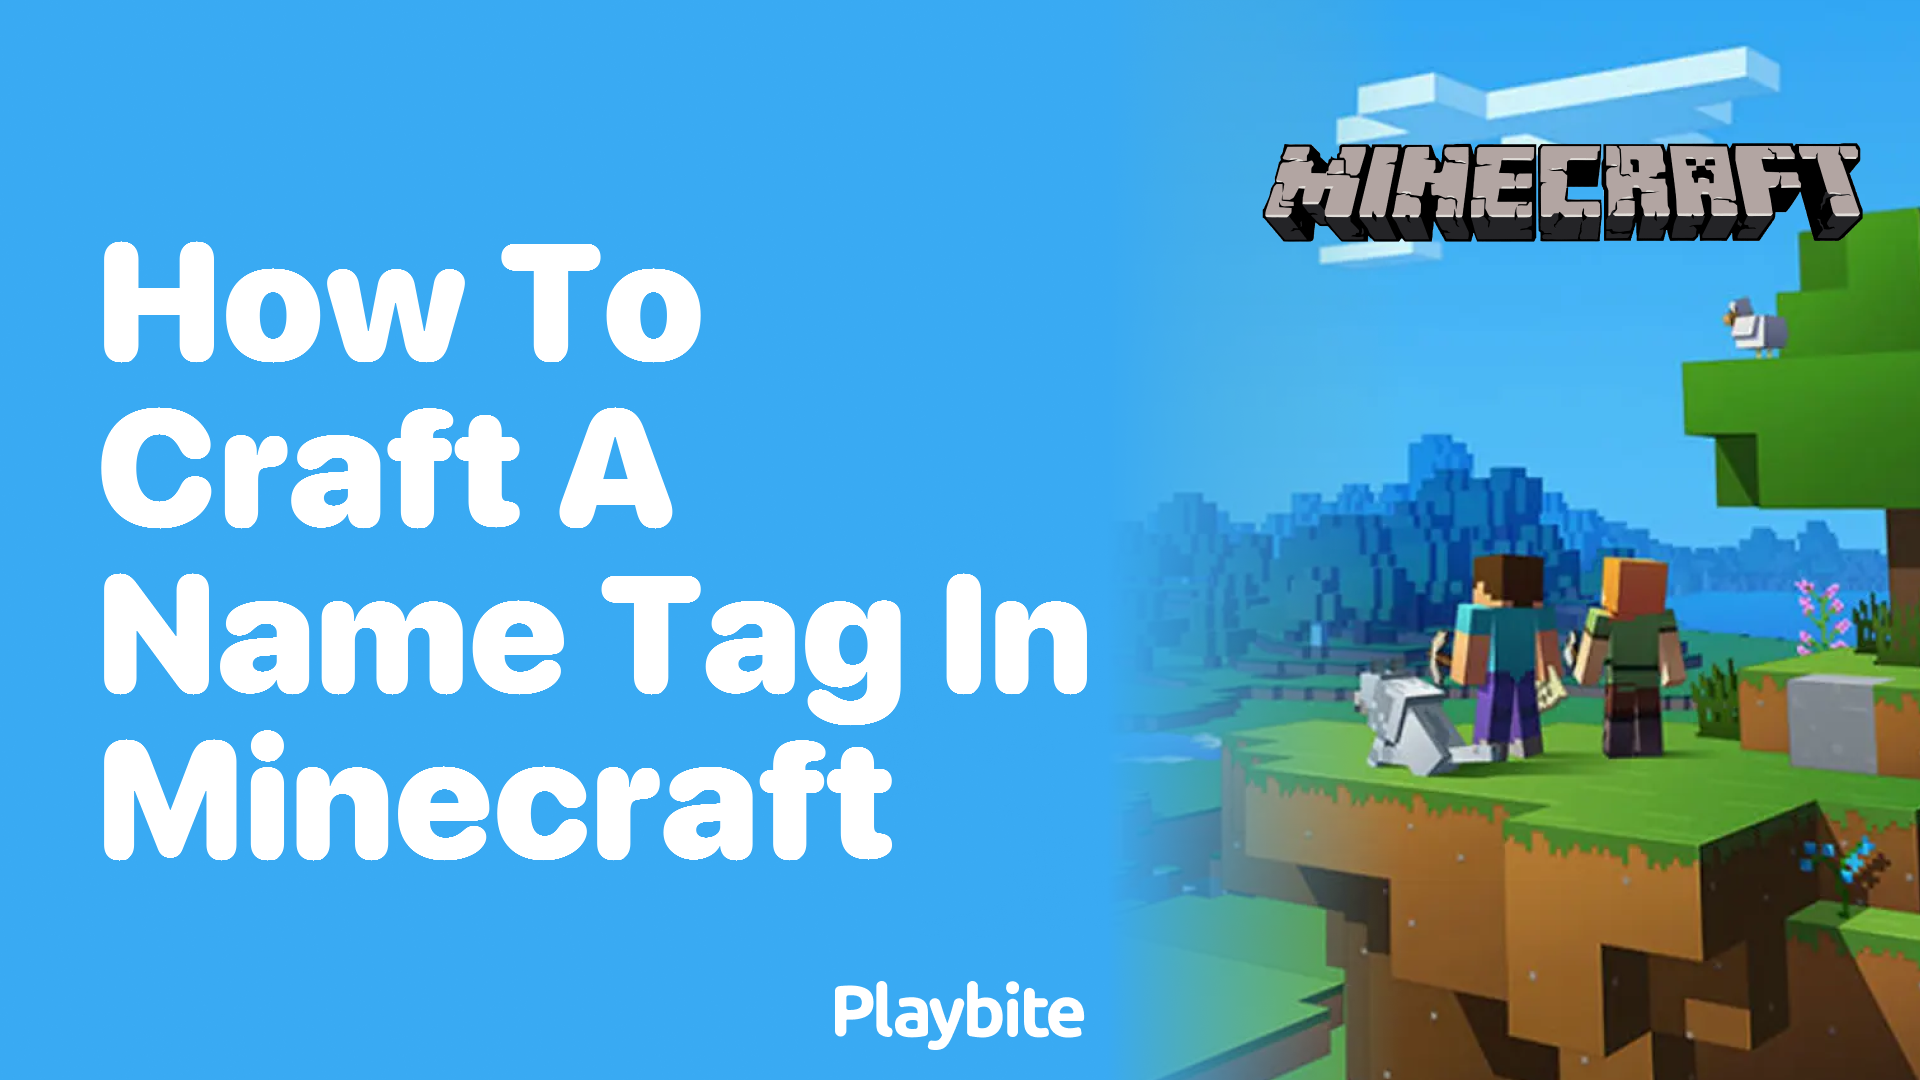 How to Craft a Name Tag in Minecraft - Playbite